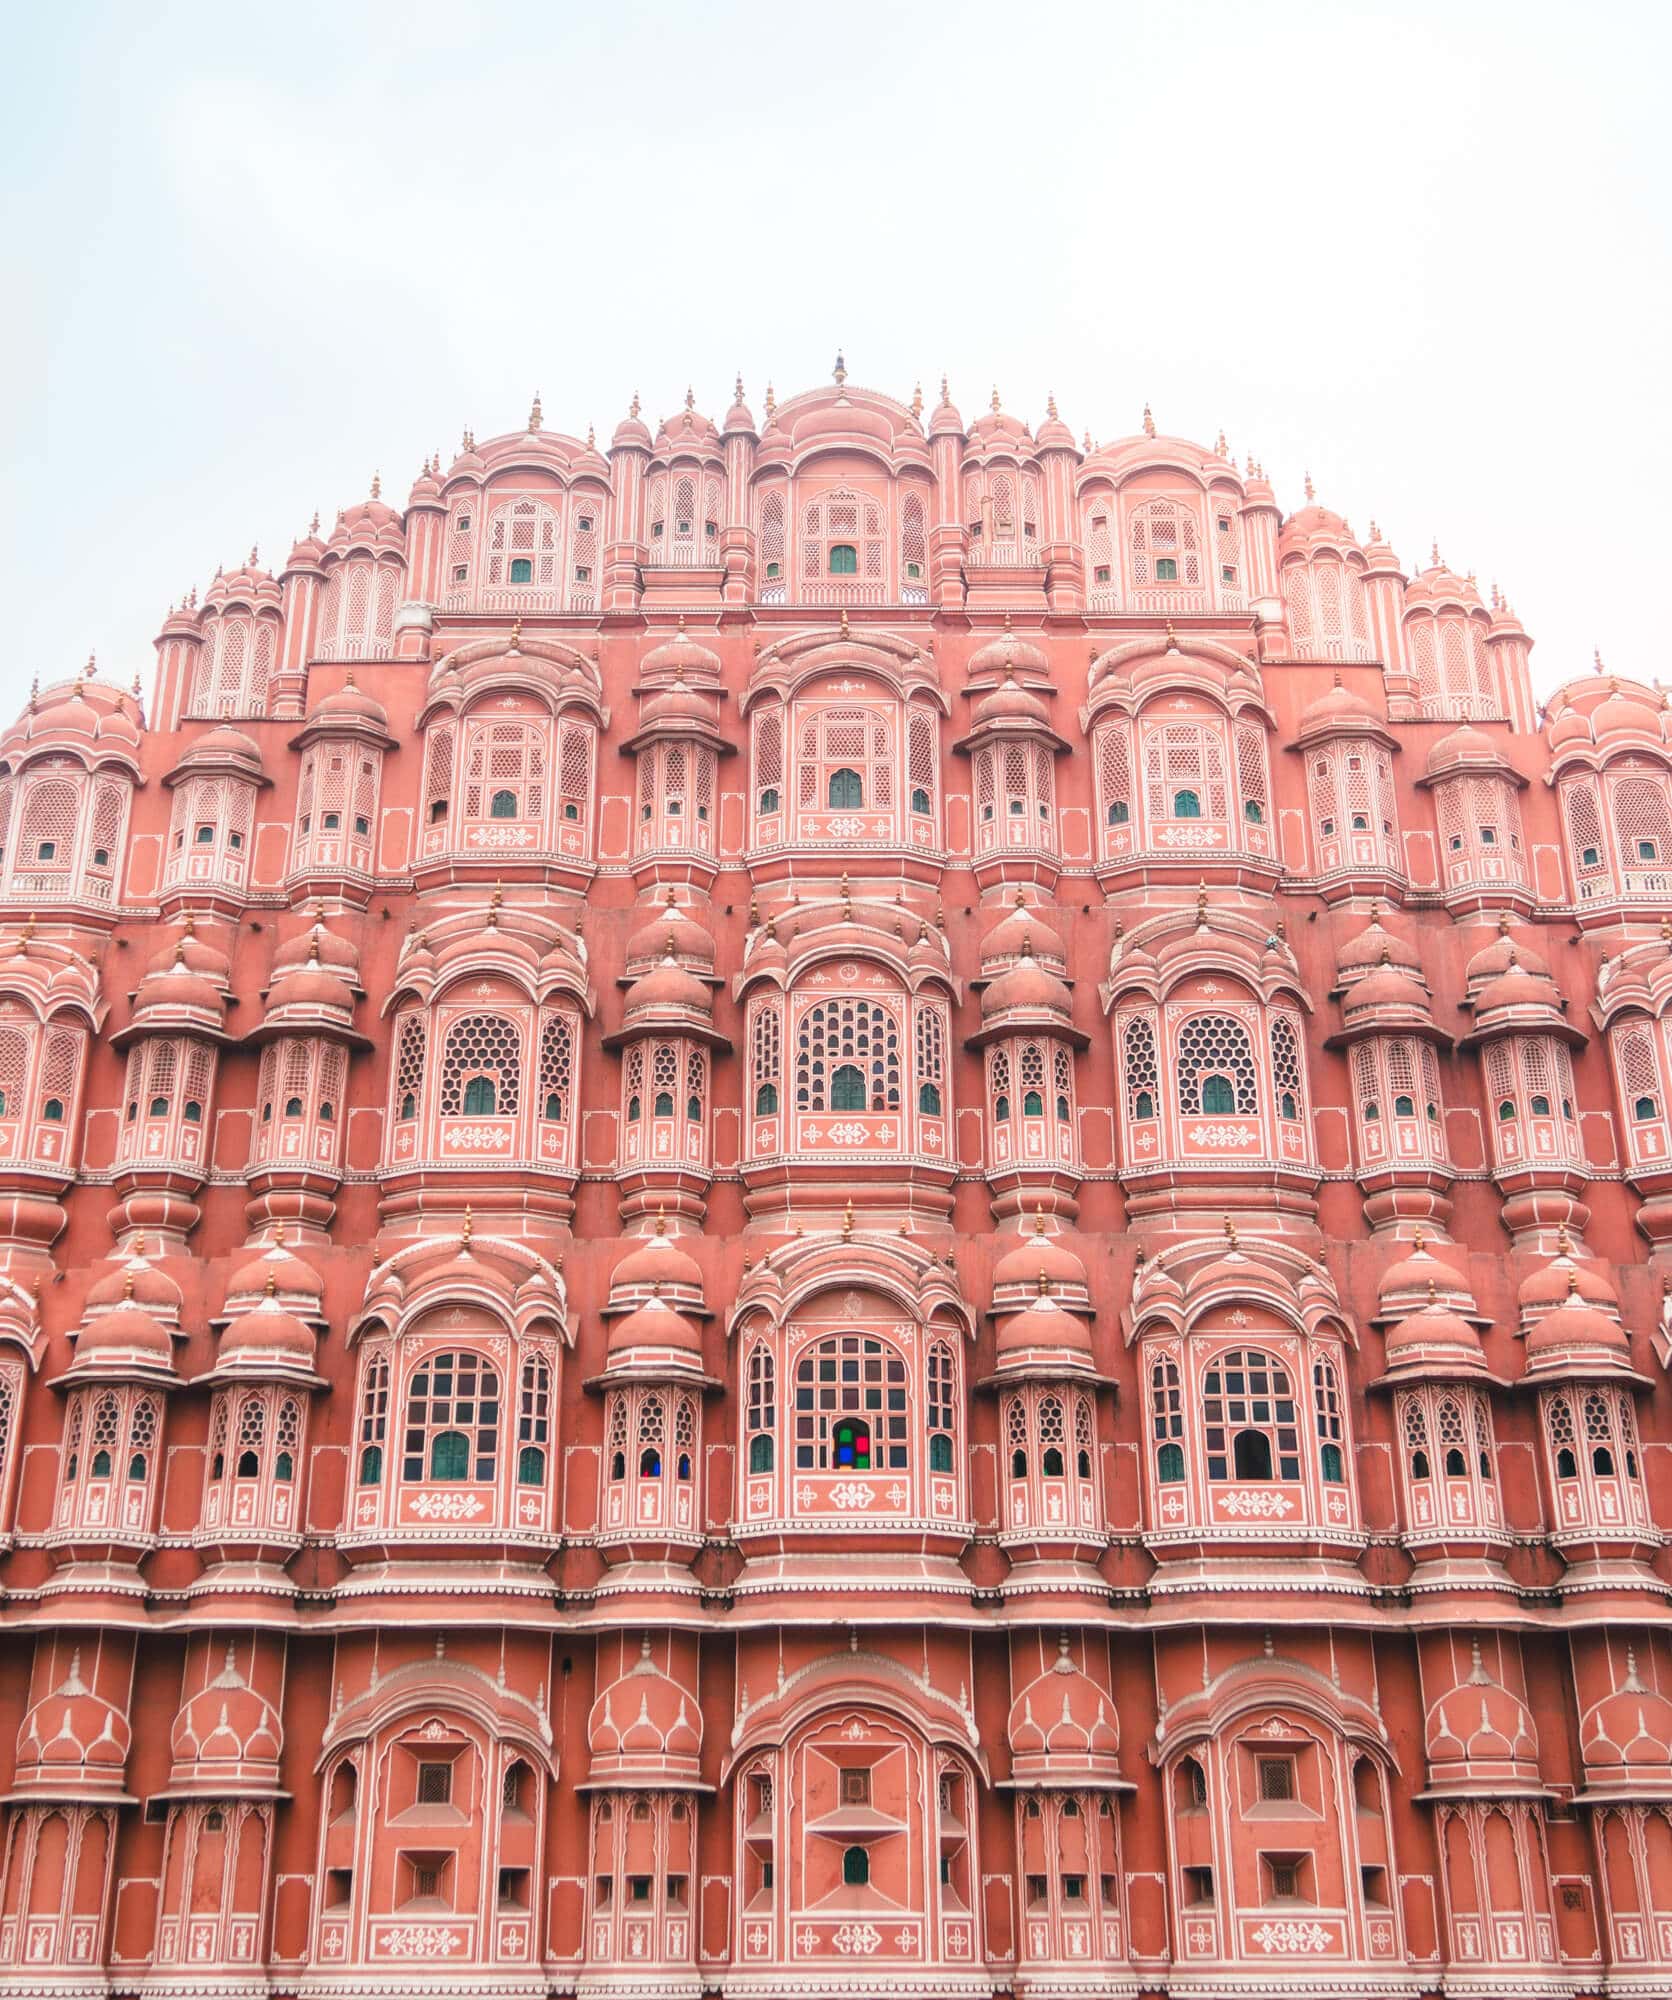 How to spend 2 days in Jaipur - Hawa Mahal in the Pink City